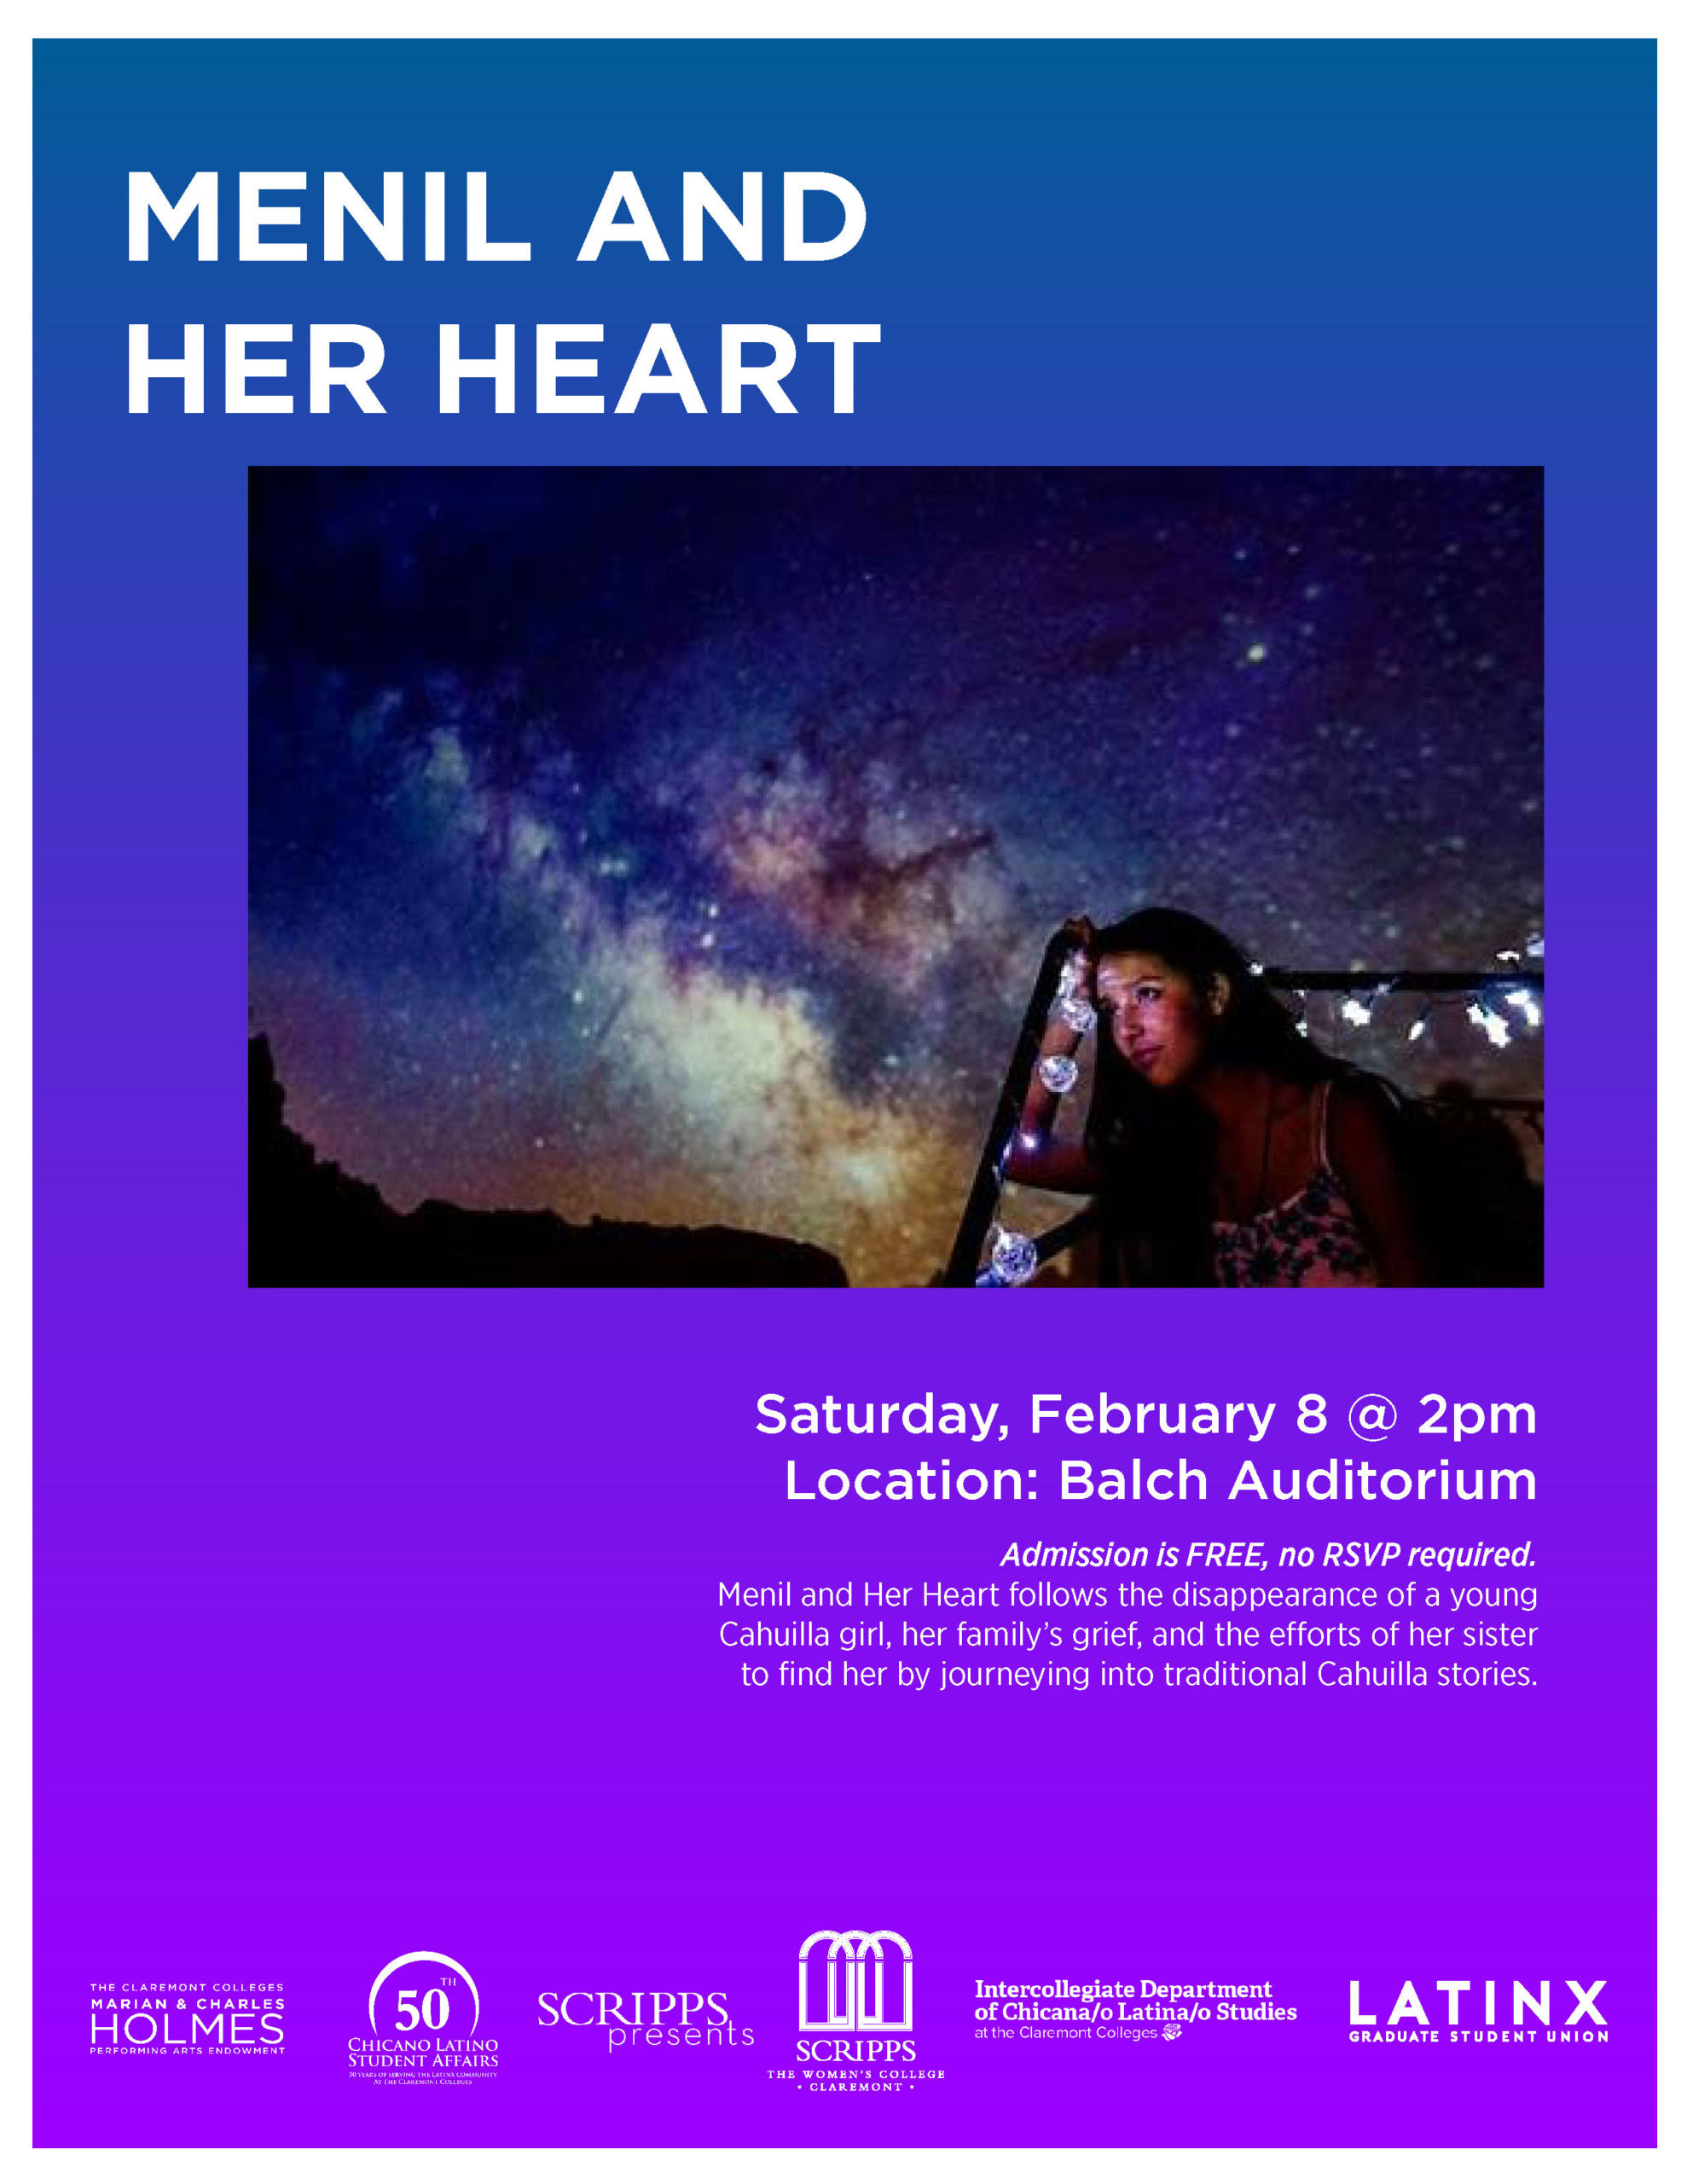 menil and her heart event poster